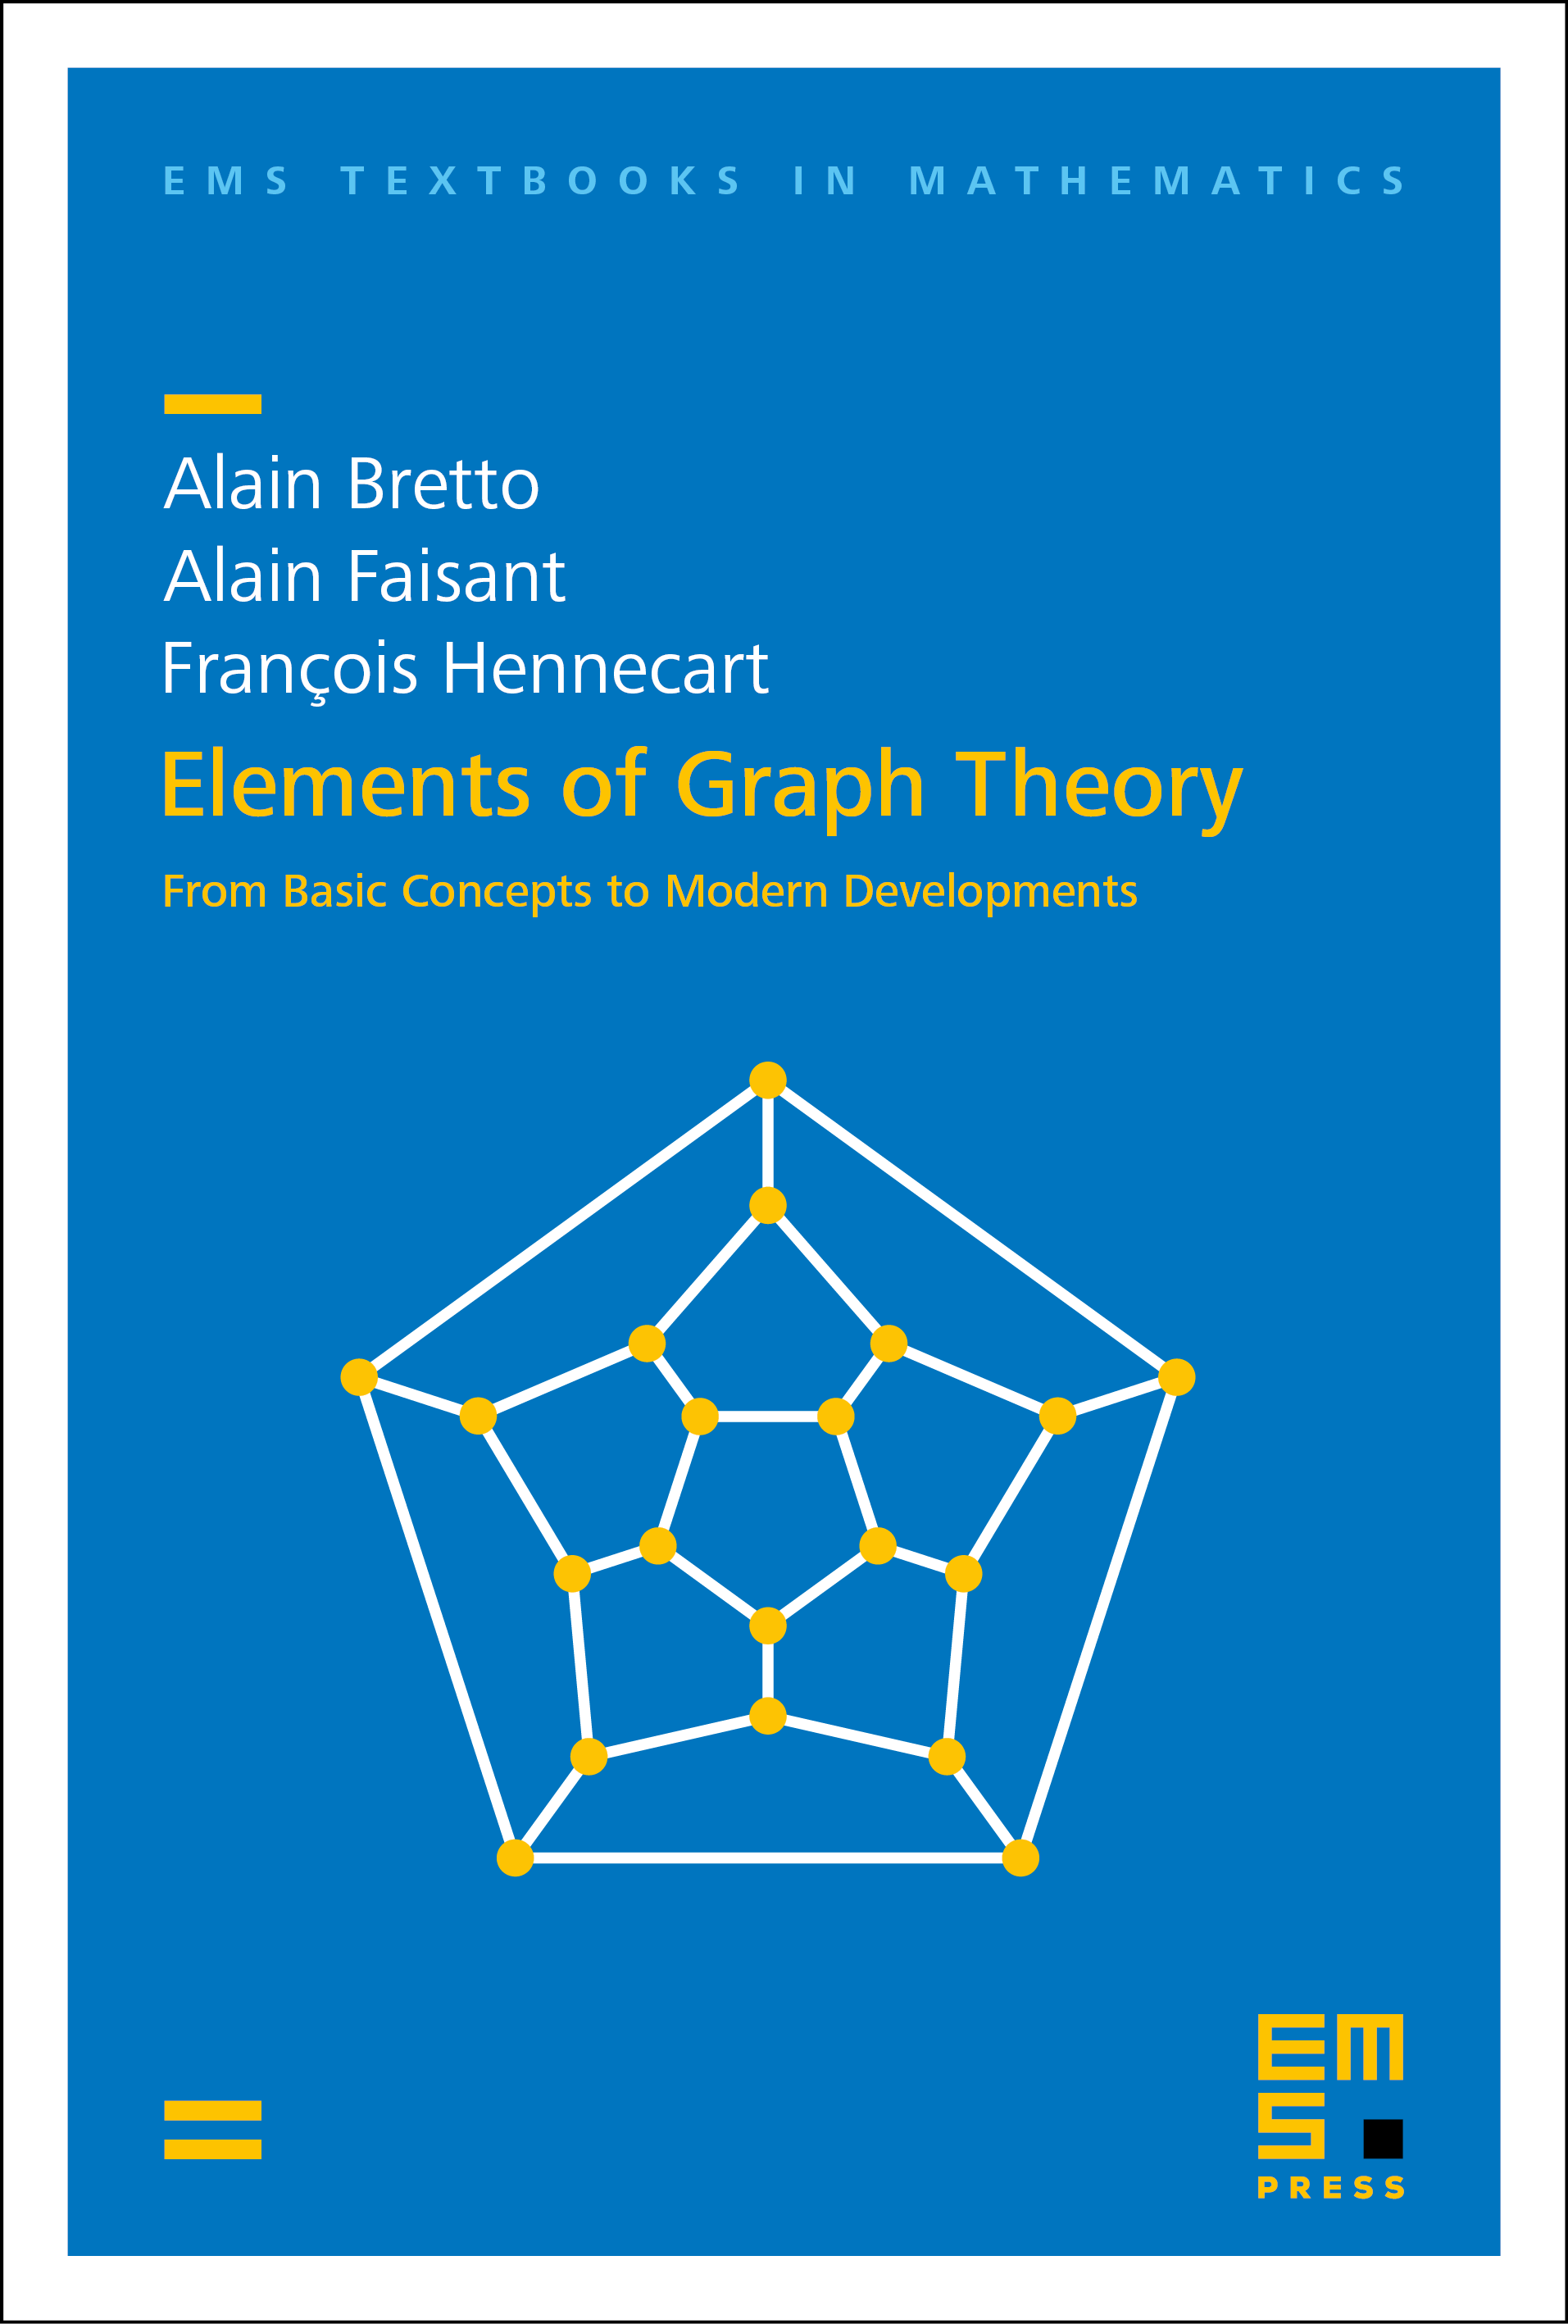 Some remarkable graphs cover